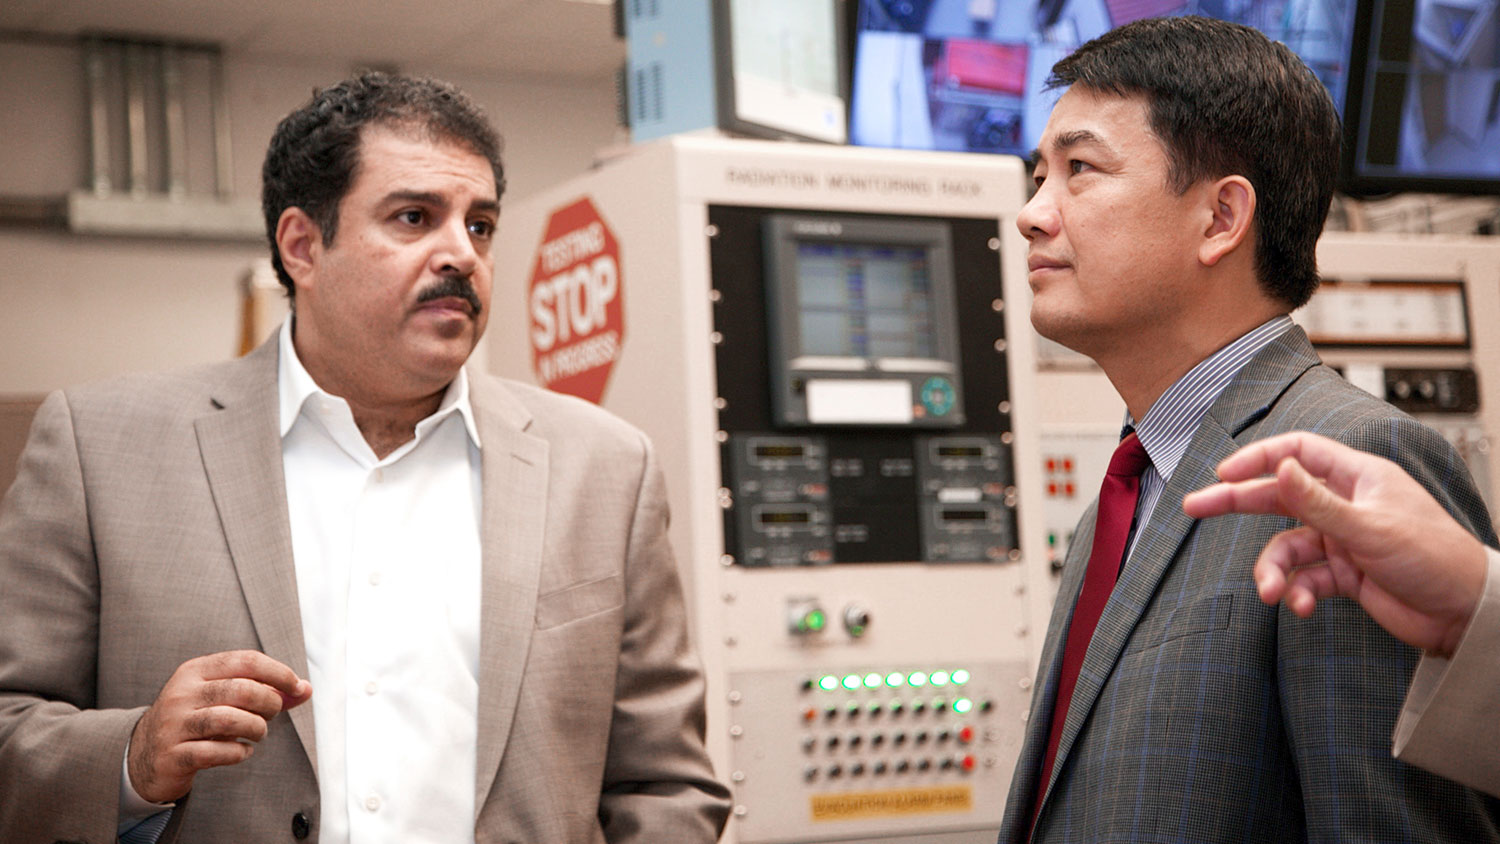 Dr. Ayman Hawari, left, director of NC State's Nuclear Reactor Program, provides Dr. Tran Chi Thanh, president of the Vietnam Atomic Energy Institute, with a tour of the PULSTAR reactor on NC State's campus.